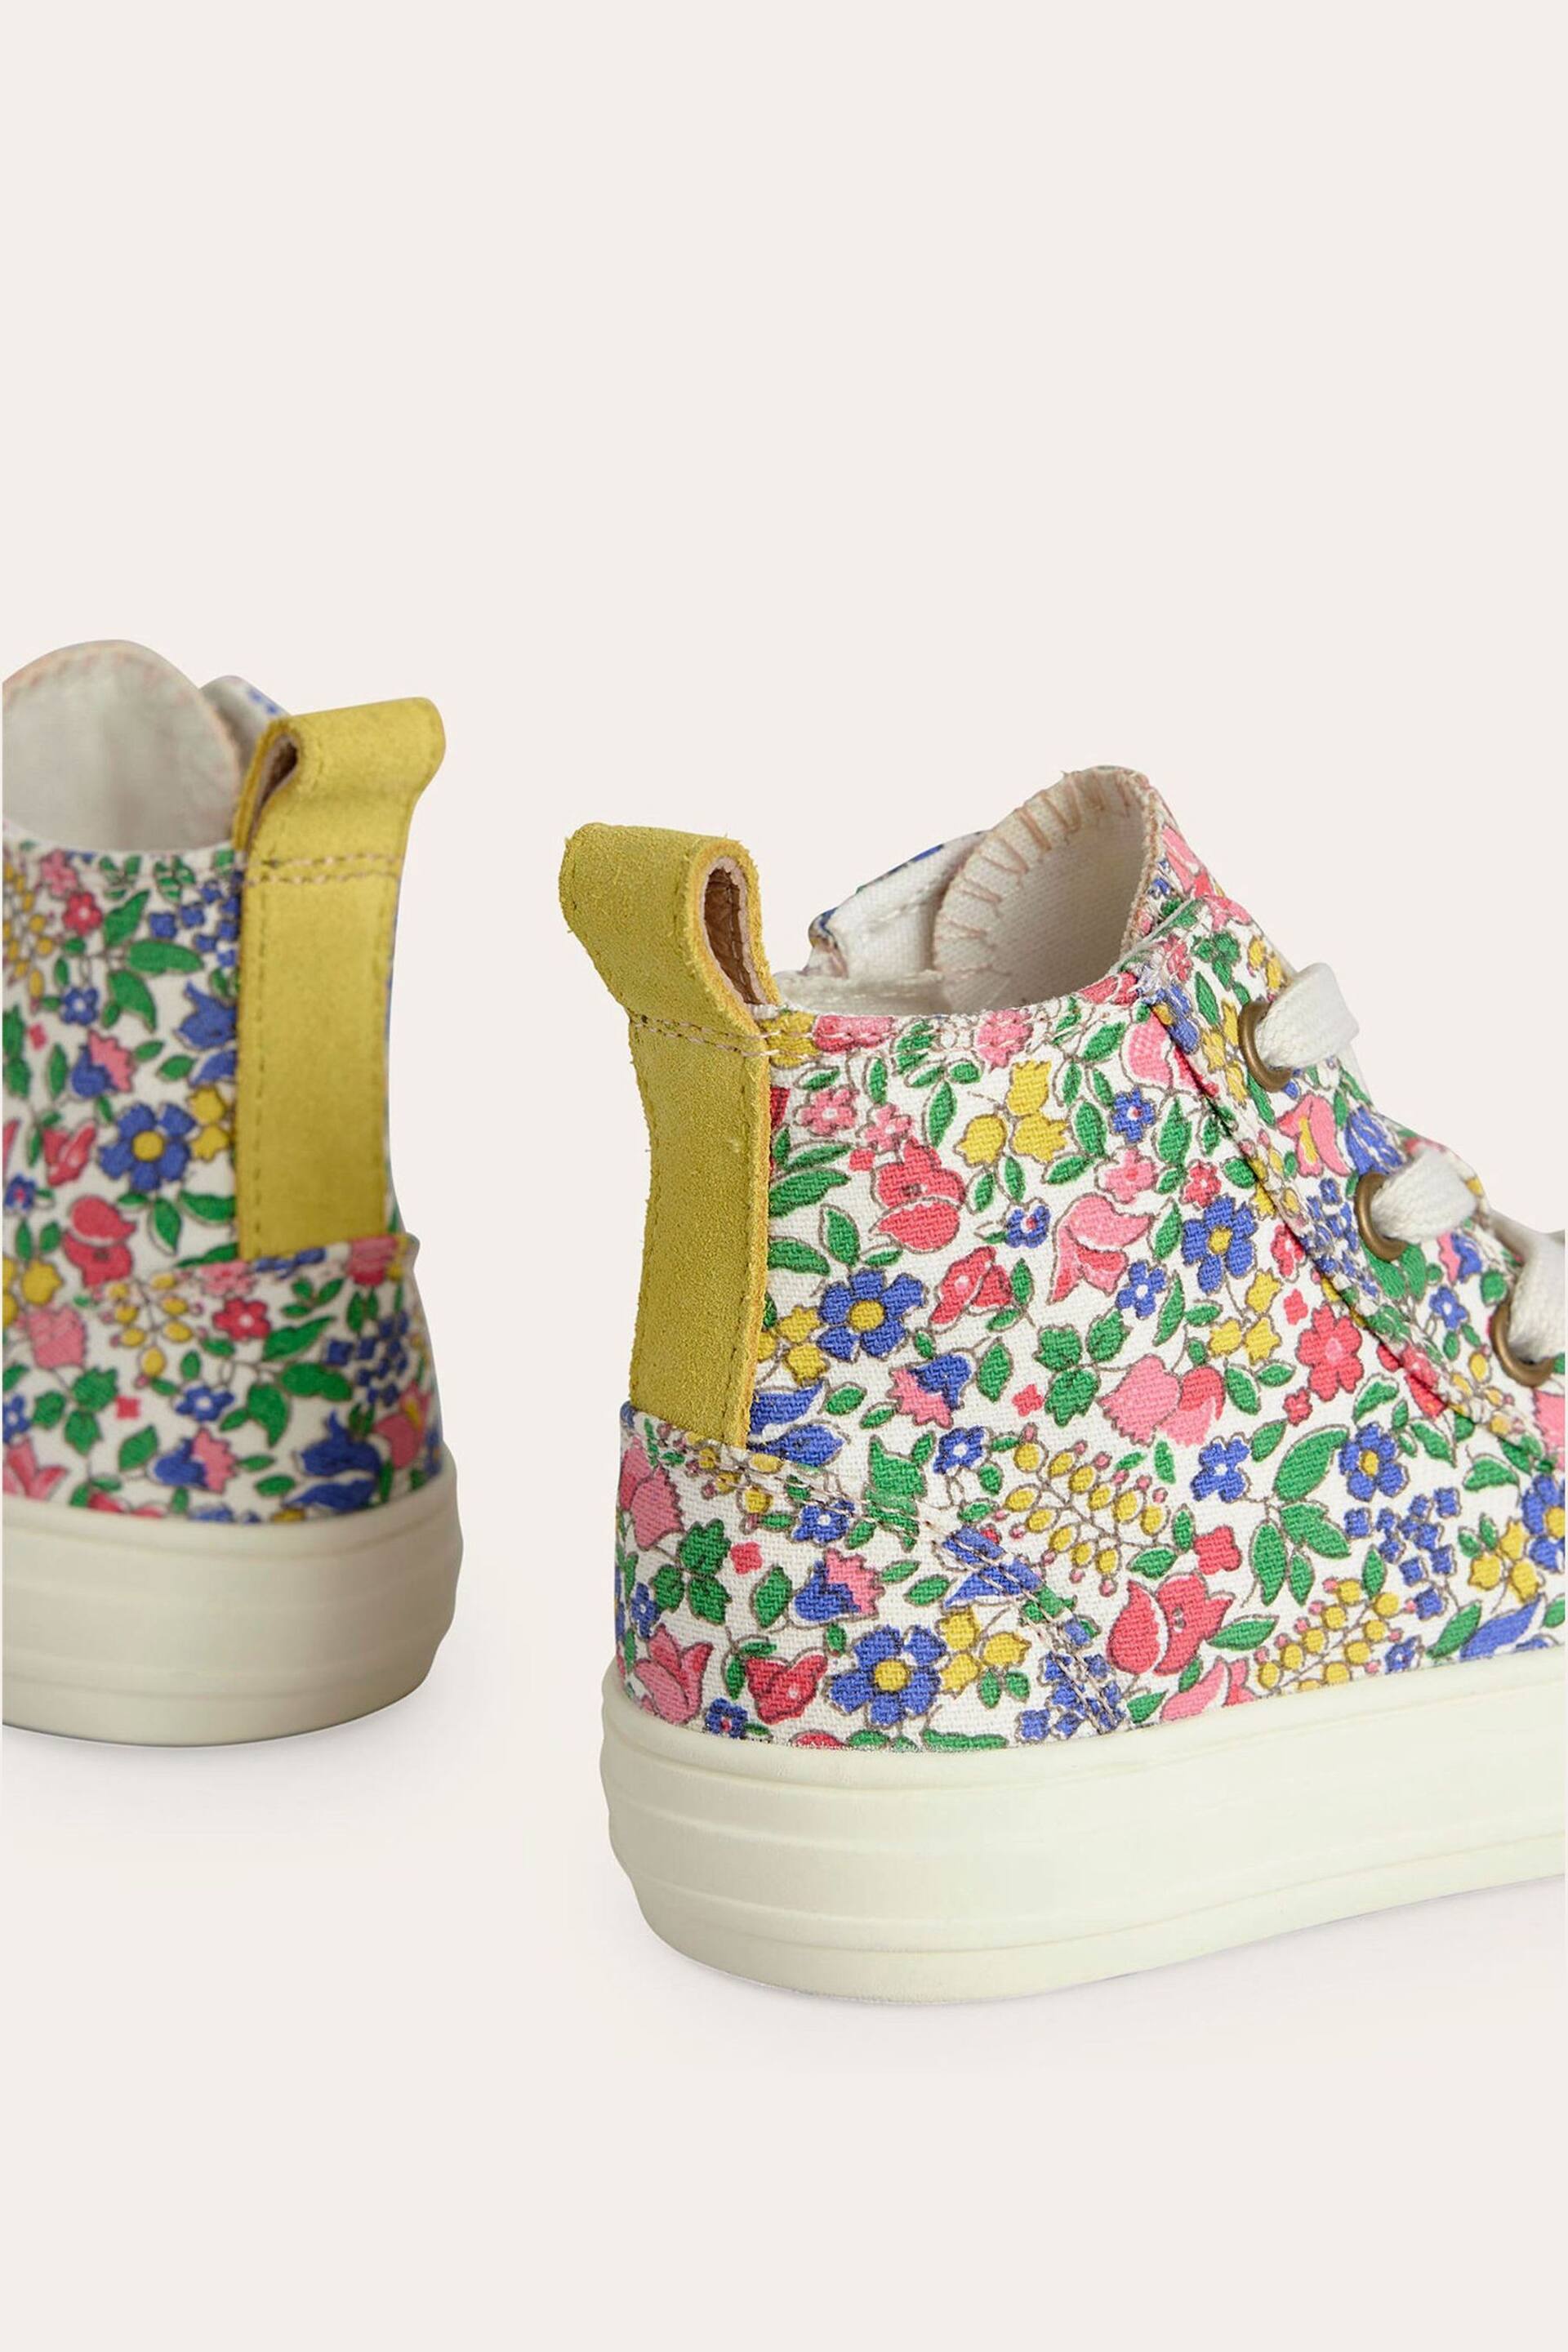 Boden Blue Canvas High Top - Image 3 of 3